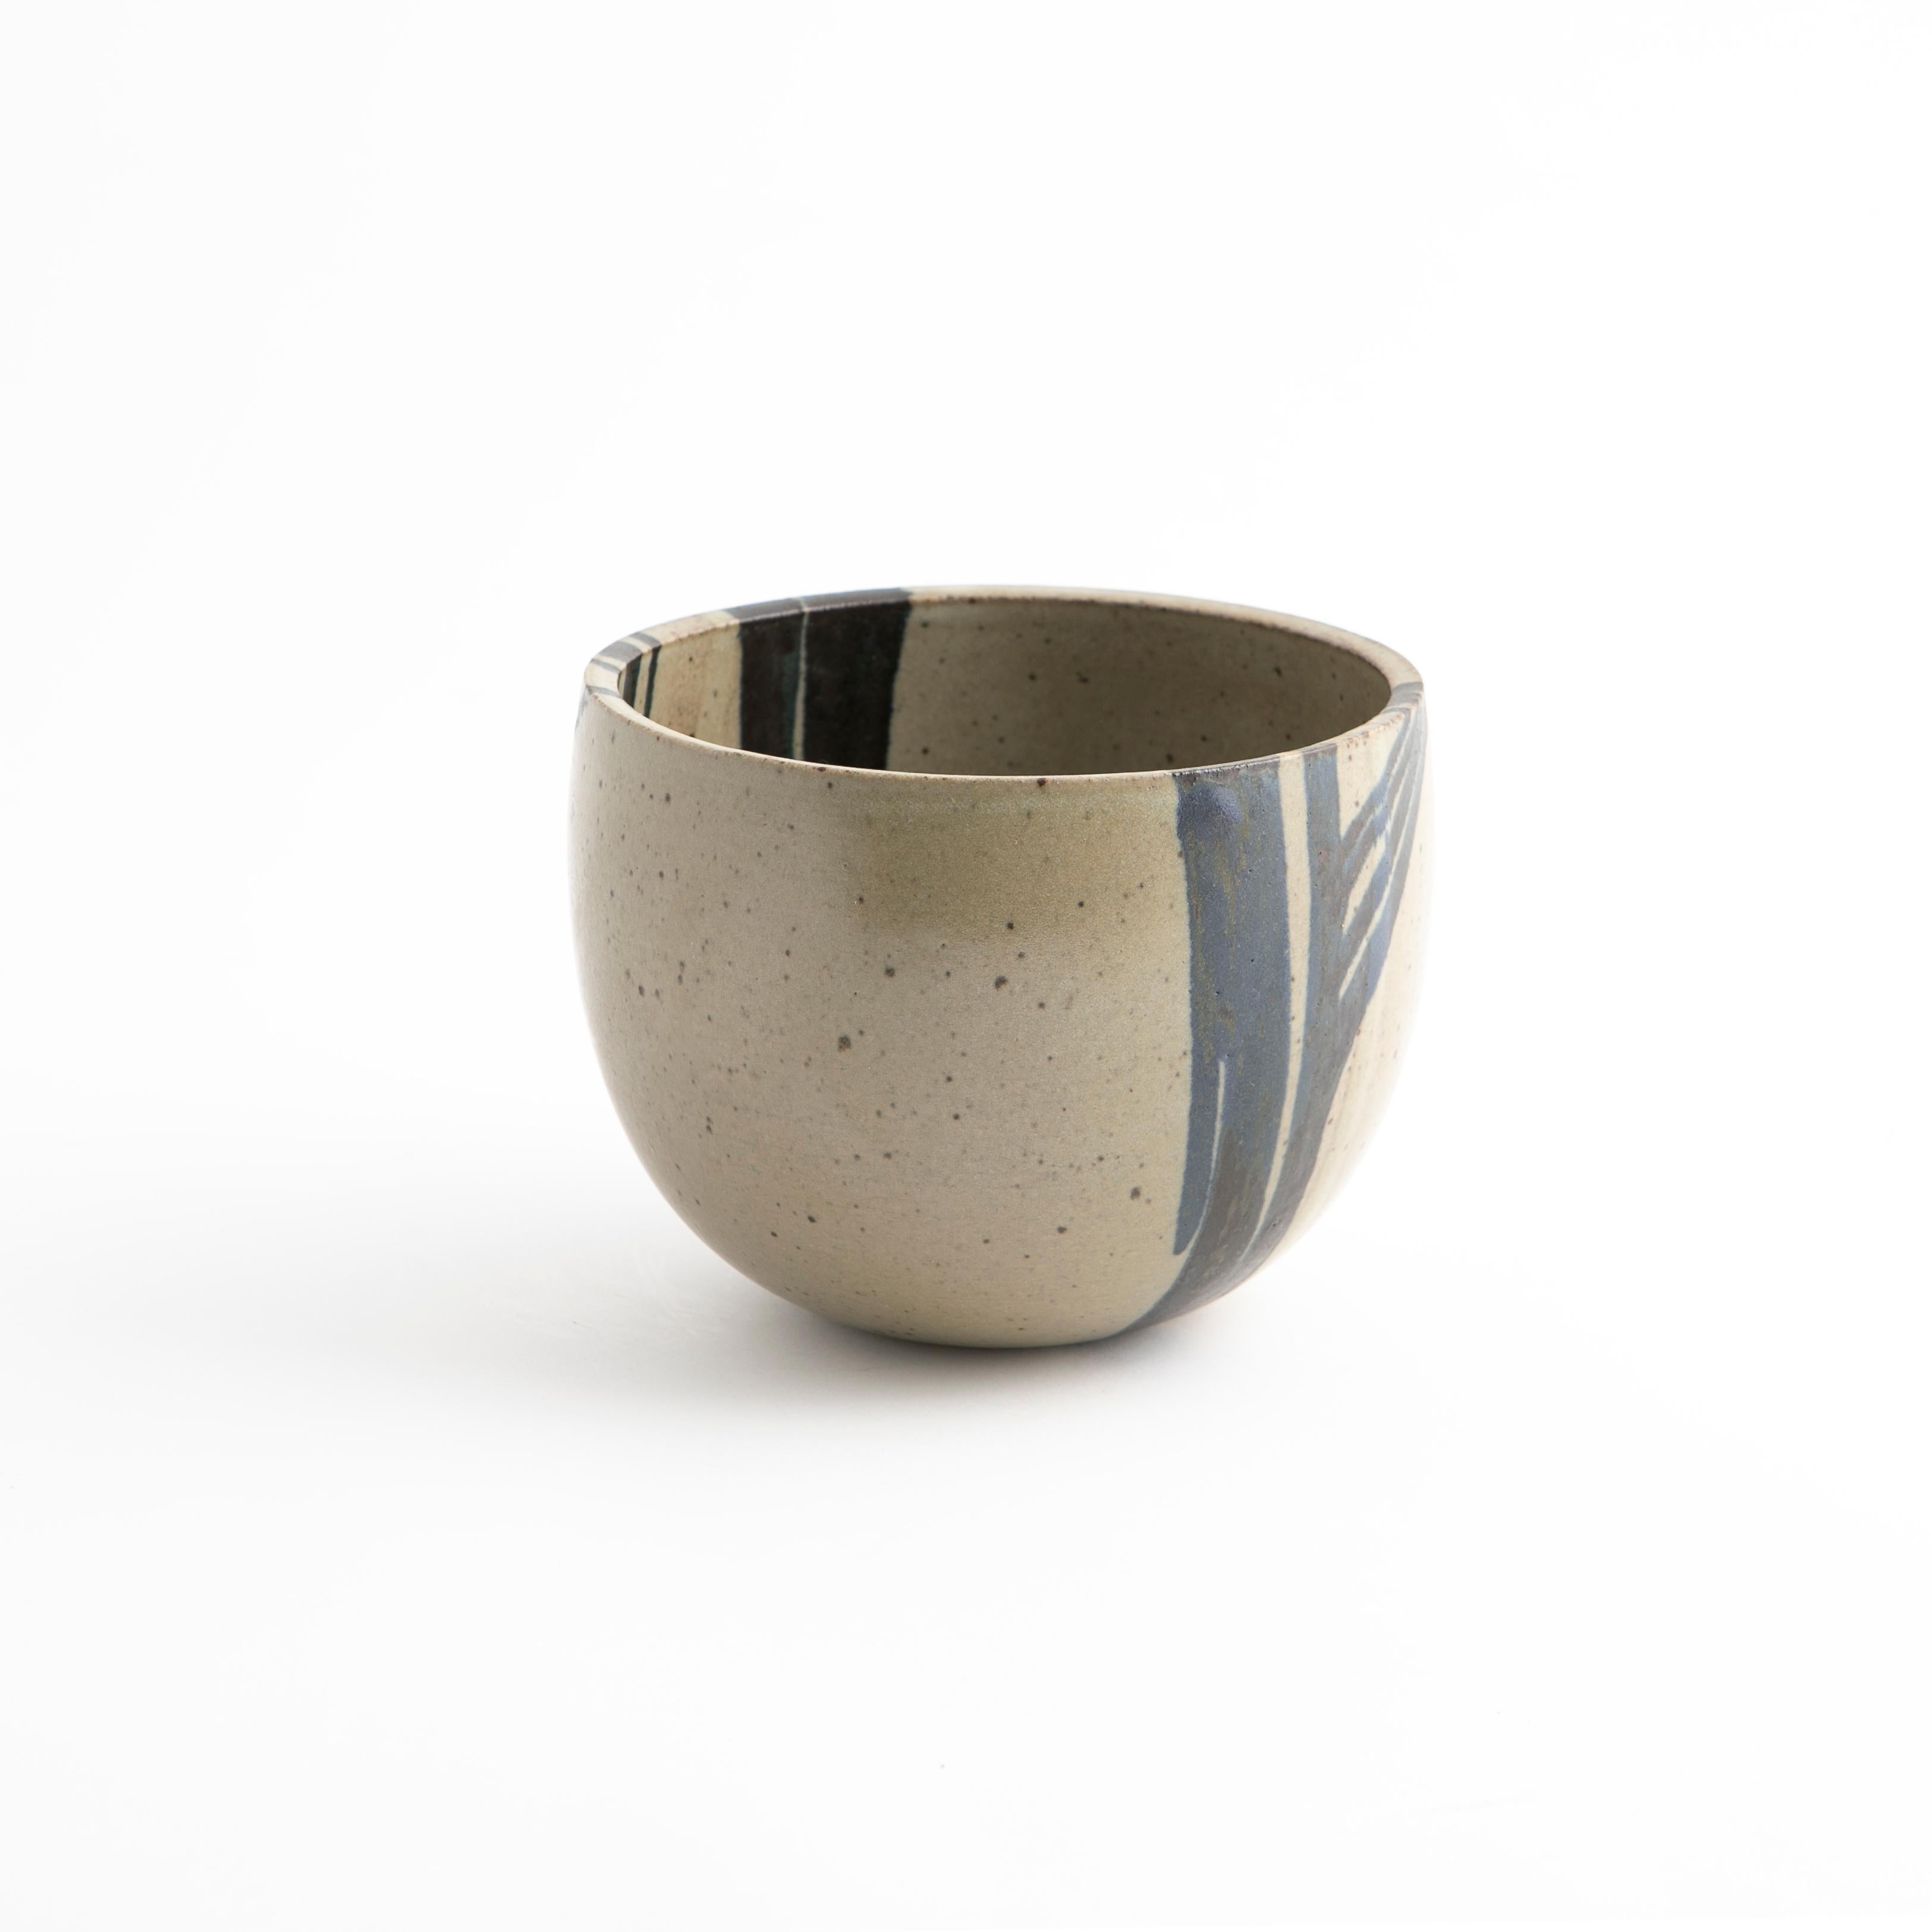 Jacob Bang, Danish 1932-2011
Bowl in stone wear with grey, blue and black glaze. H: 16 cm.
Made in Jacob Bang's own studio during the 1960s-1970.
Marked on the base.
Jacob Bang was a Danish ceramicist, designer and sculptor and the son of ceramic